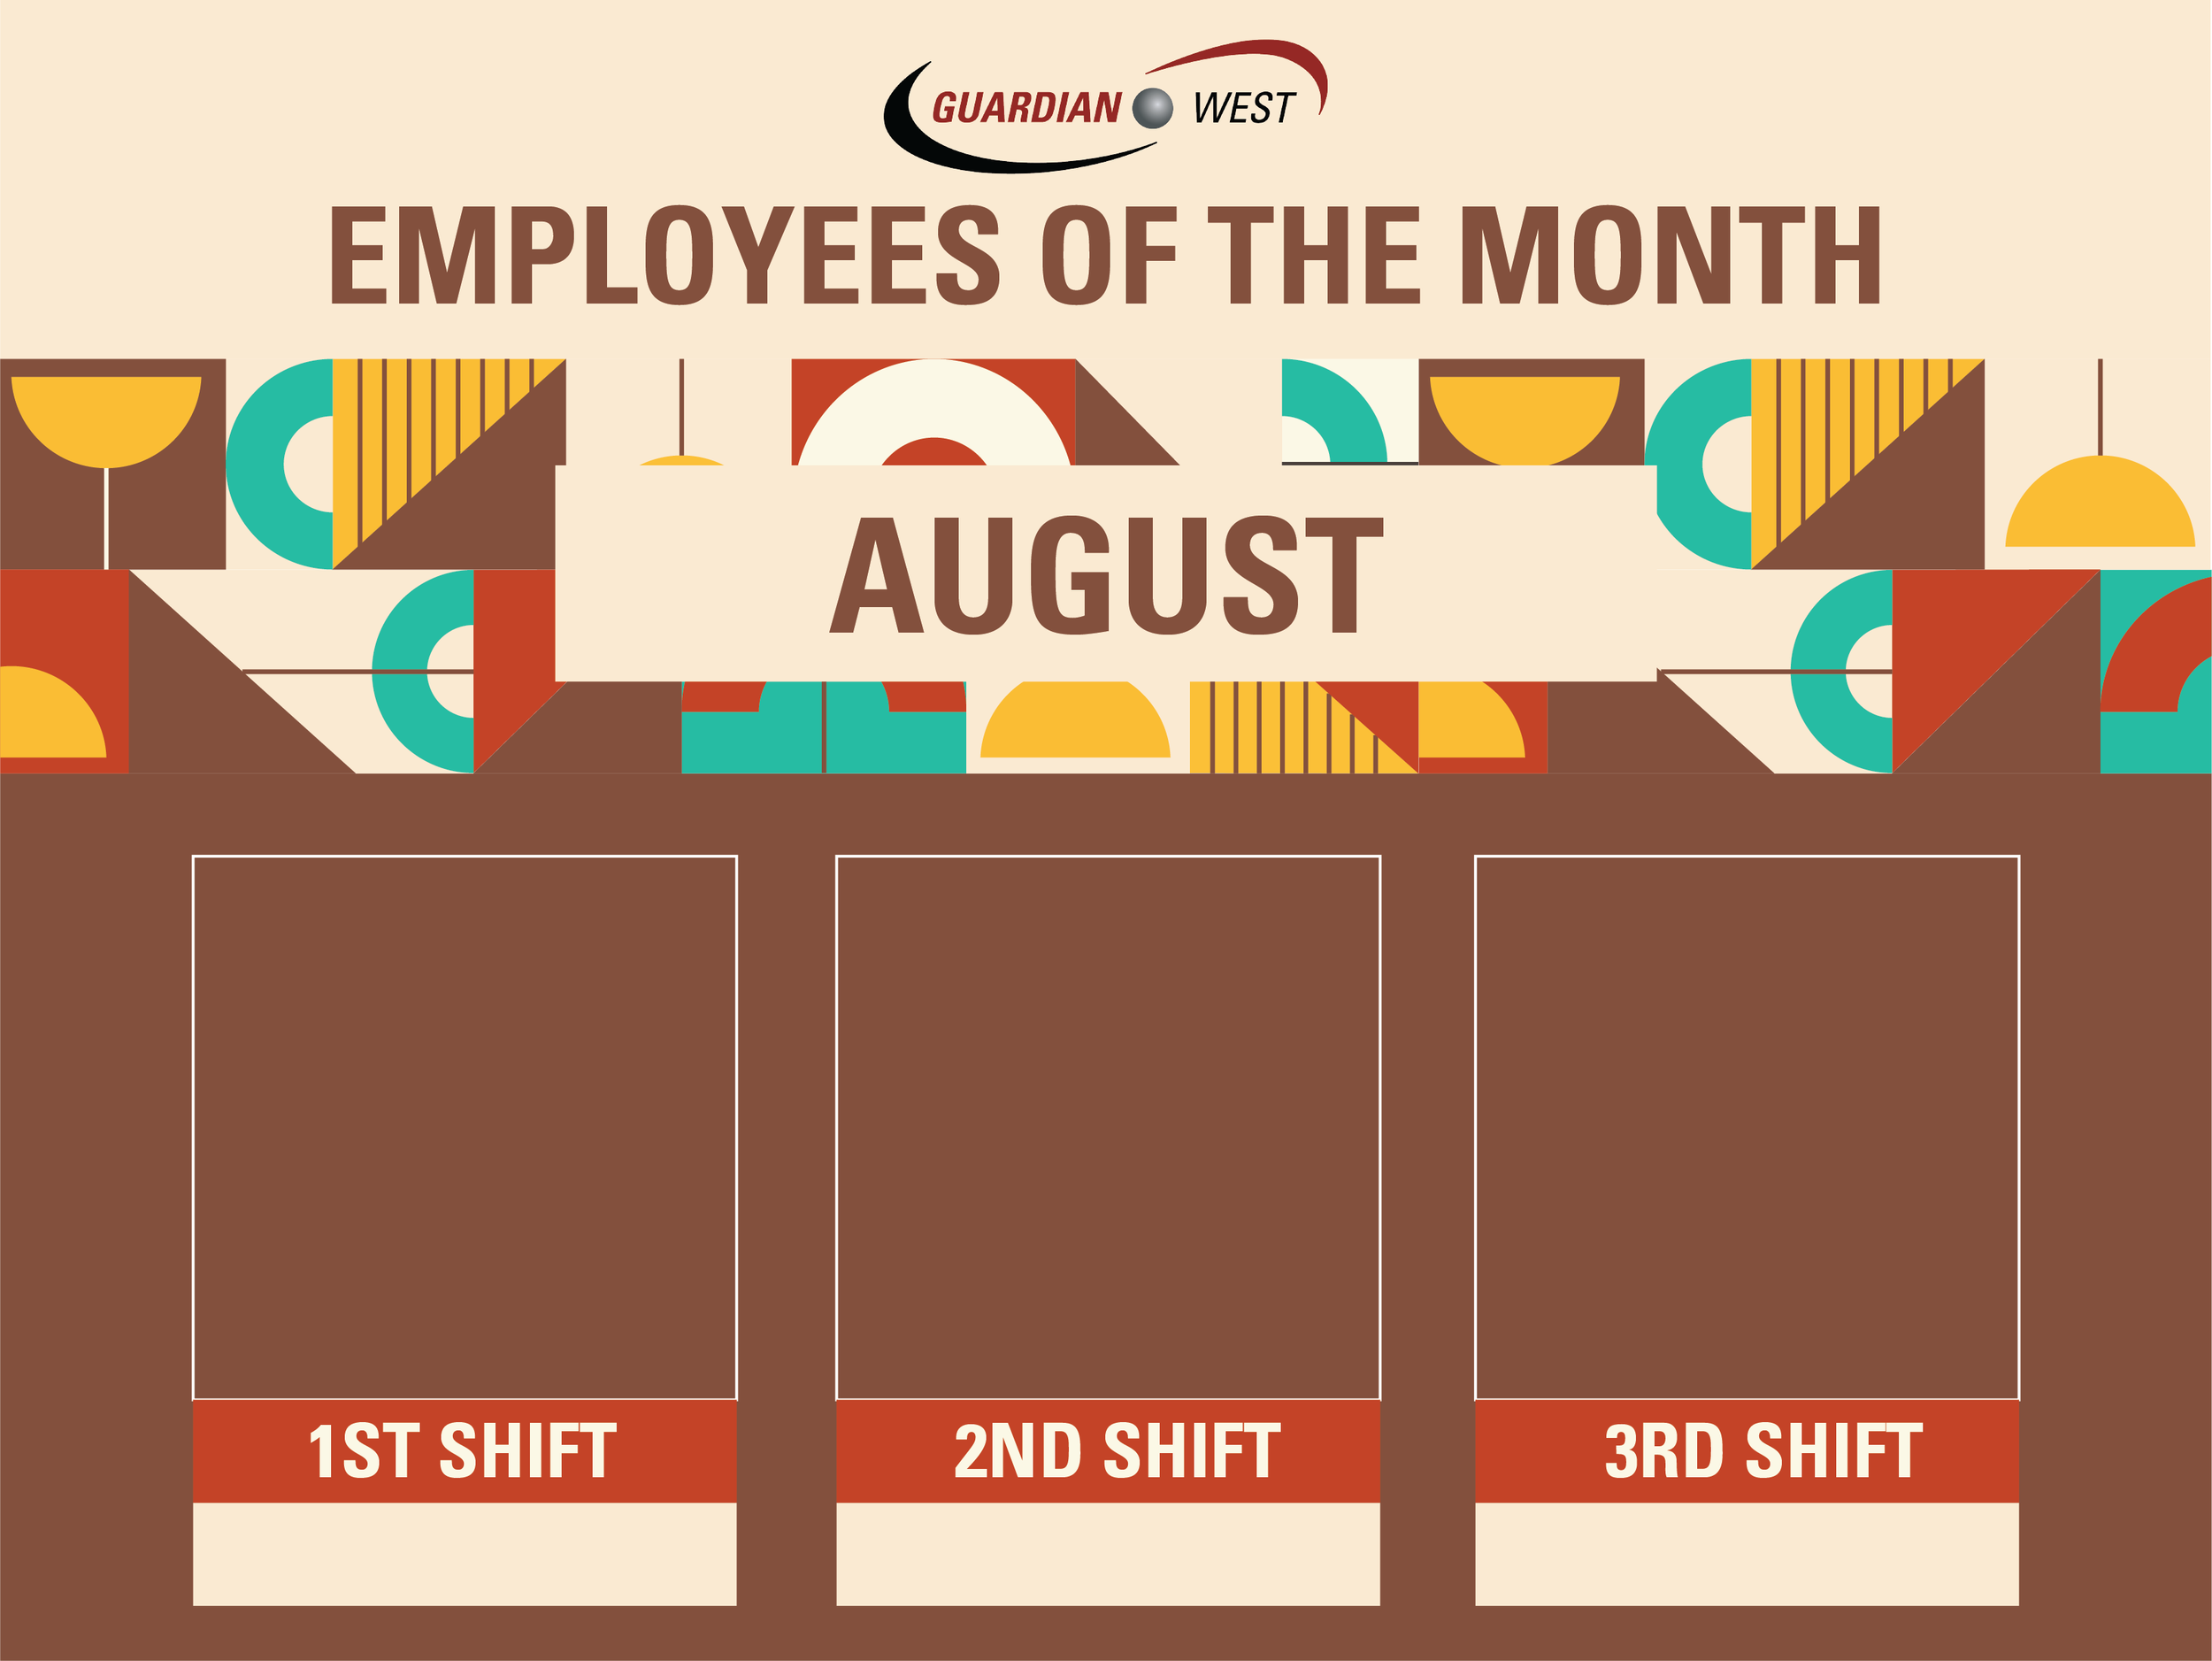 GW_Employee of the month2-09.png